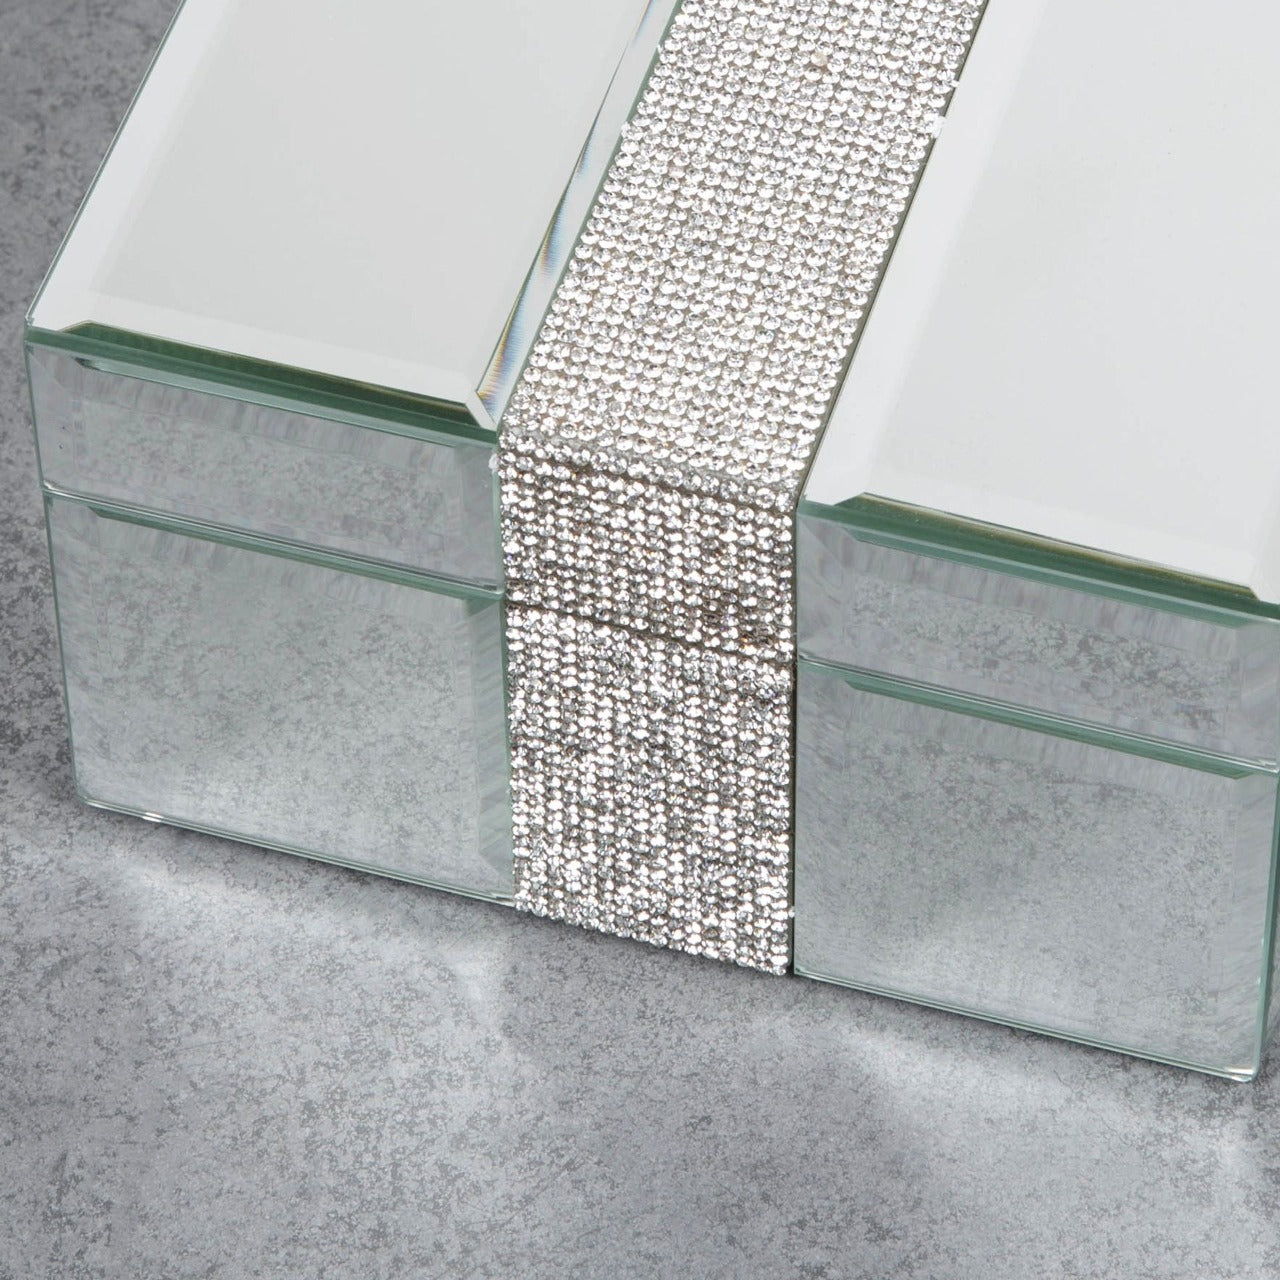 Mirror Jewellery Box with Diamante Band - Small  Store your jewellery and accessories in twinkling style with this diamante decorated mirror glass jewellery box. From the HESTIA® Silver Luxe collection - unparalleled glamour, style and elegance in contemporary home and gift.